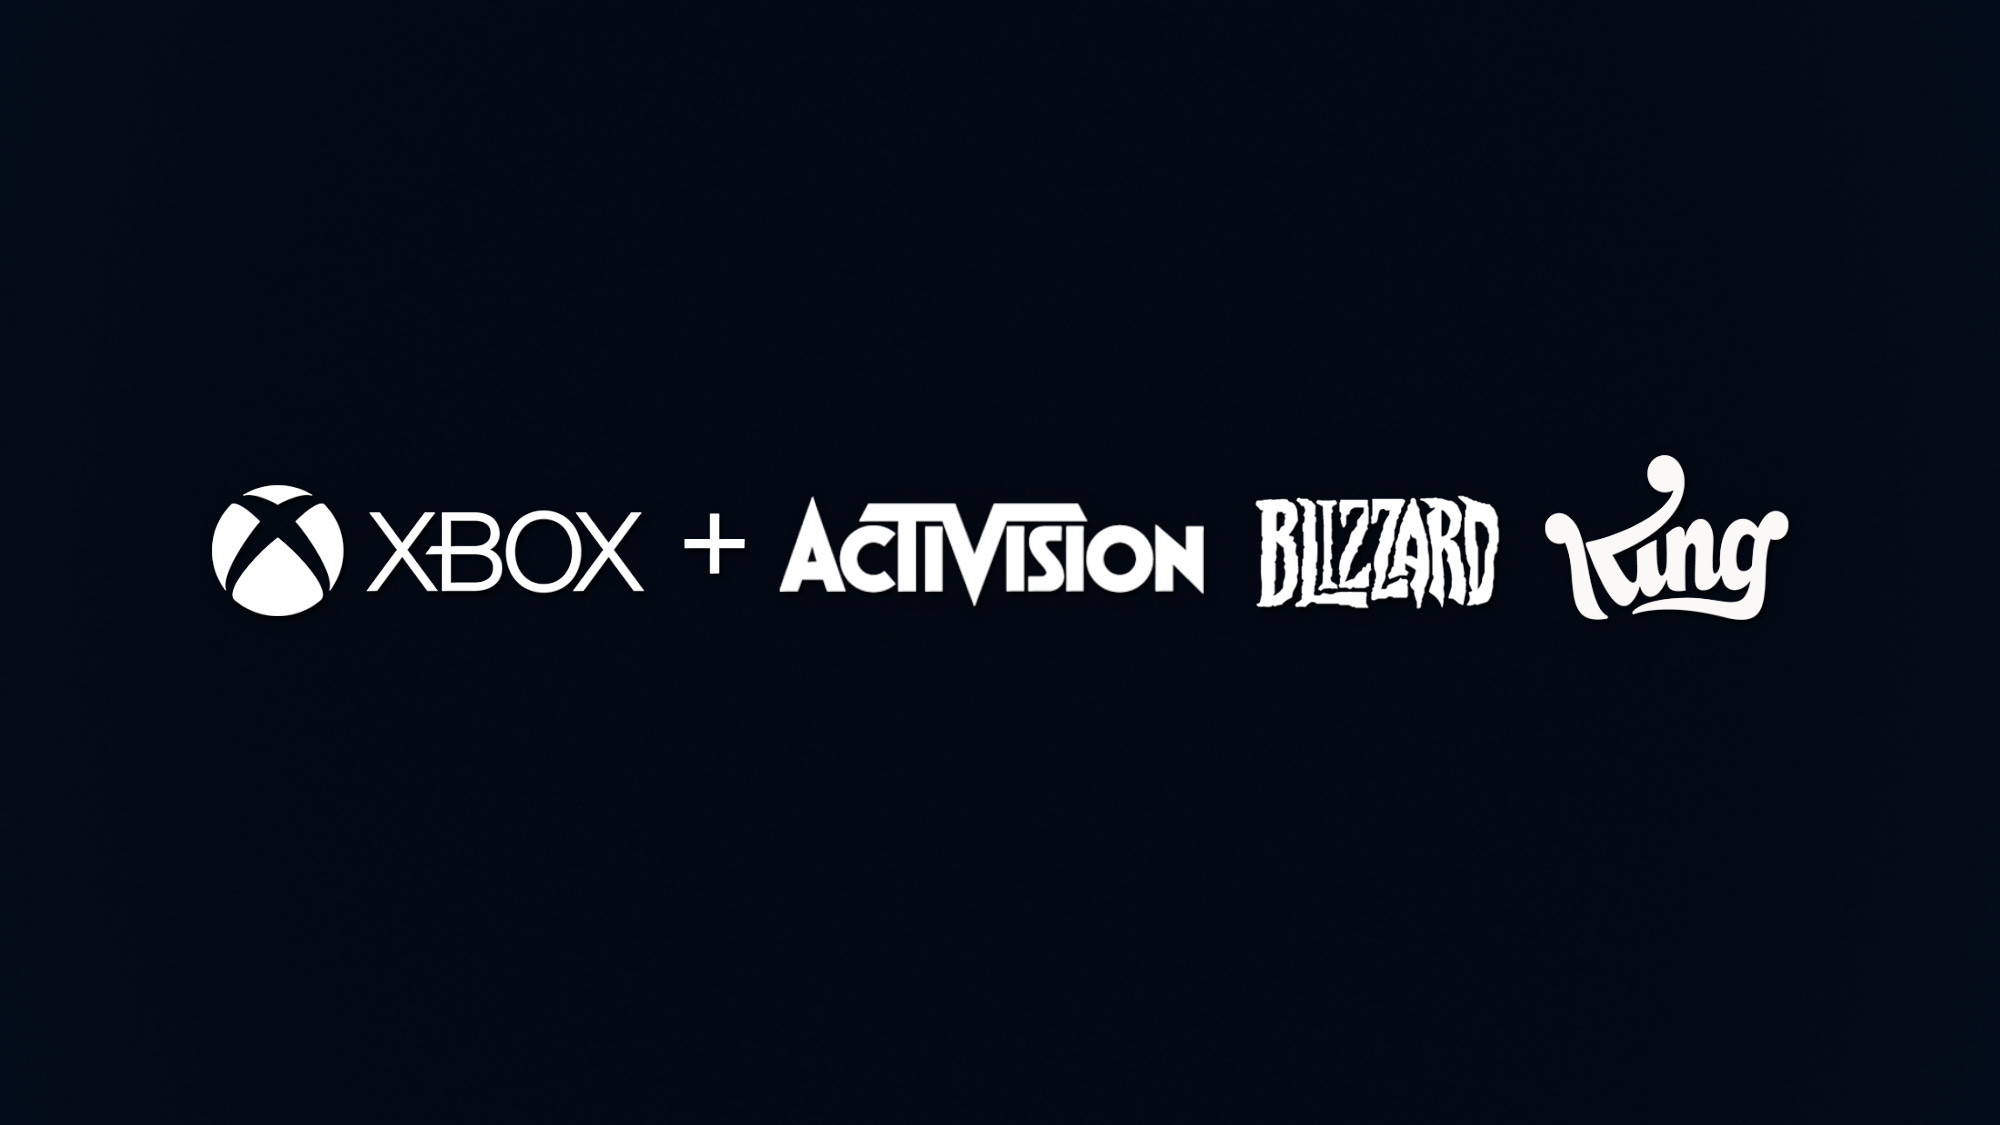 Guest Post by Thecoinrepublic.com: Historic Activision Blizzard